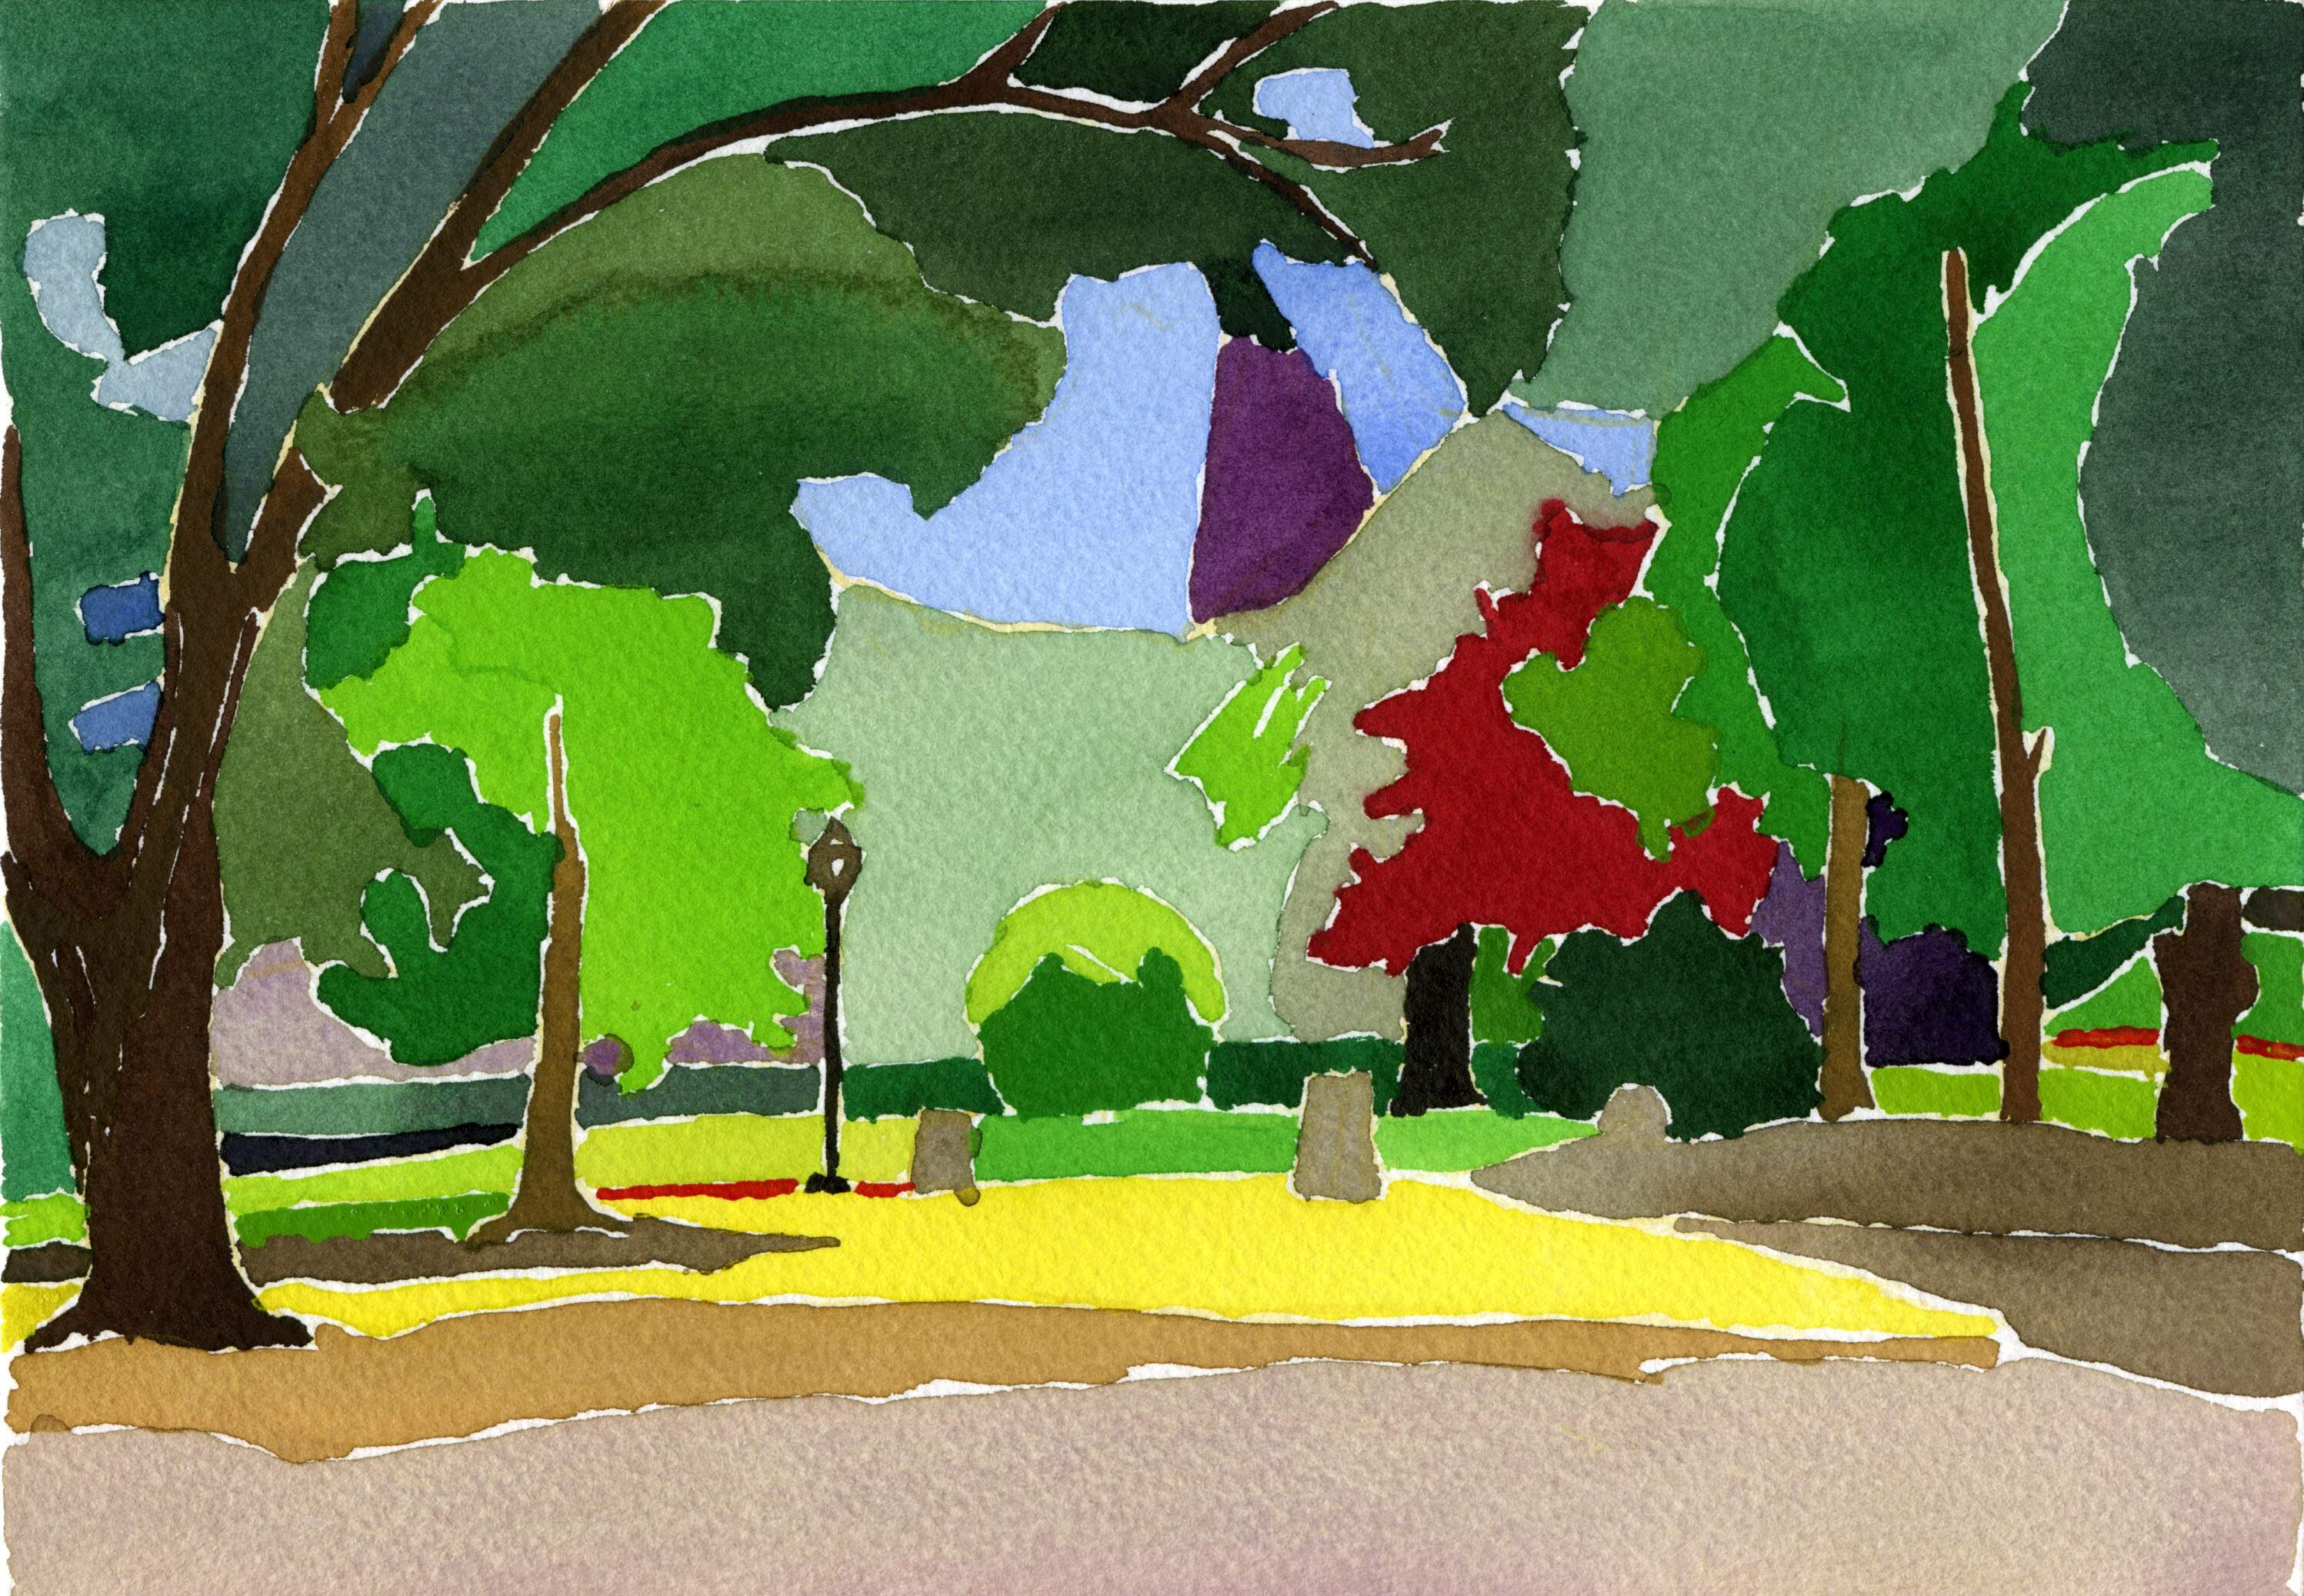 "Villa Borghese" - 2017 - watercoulour on paper 18x25 cm - Unframed -  Private collection